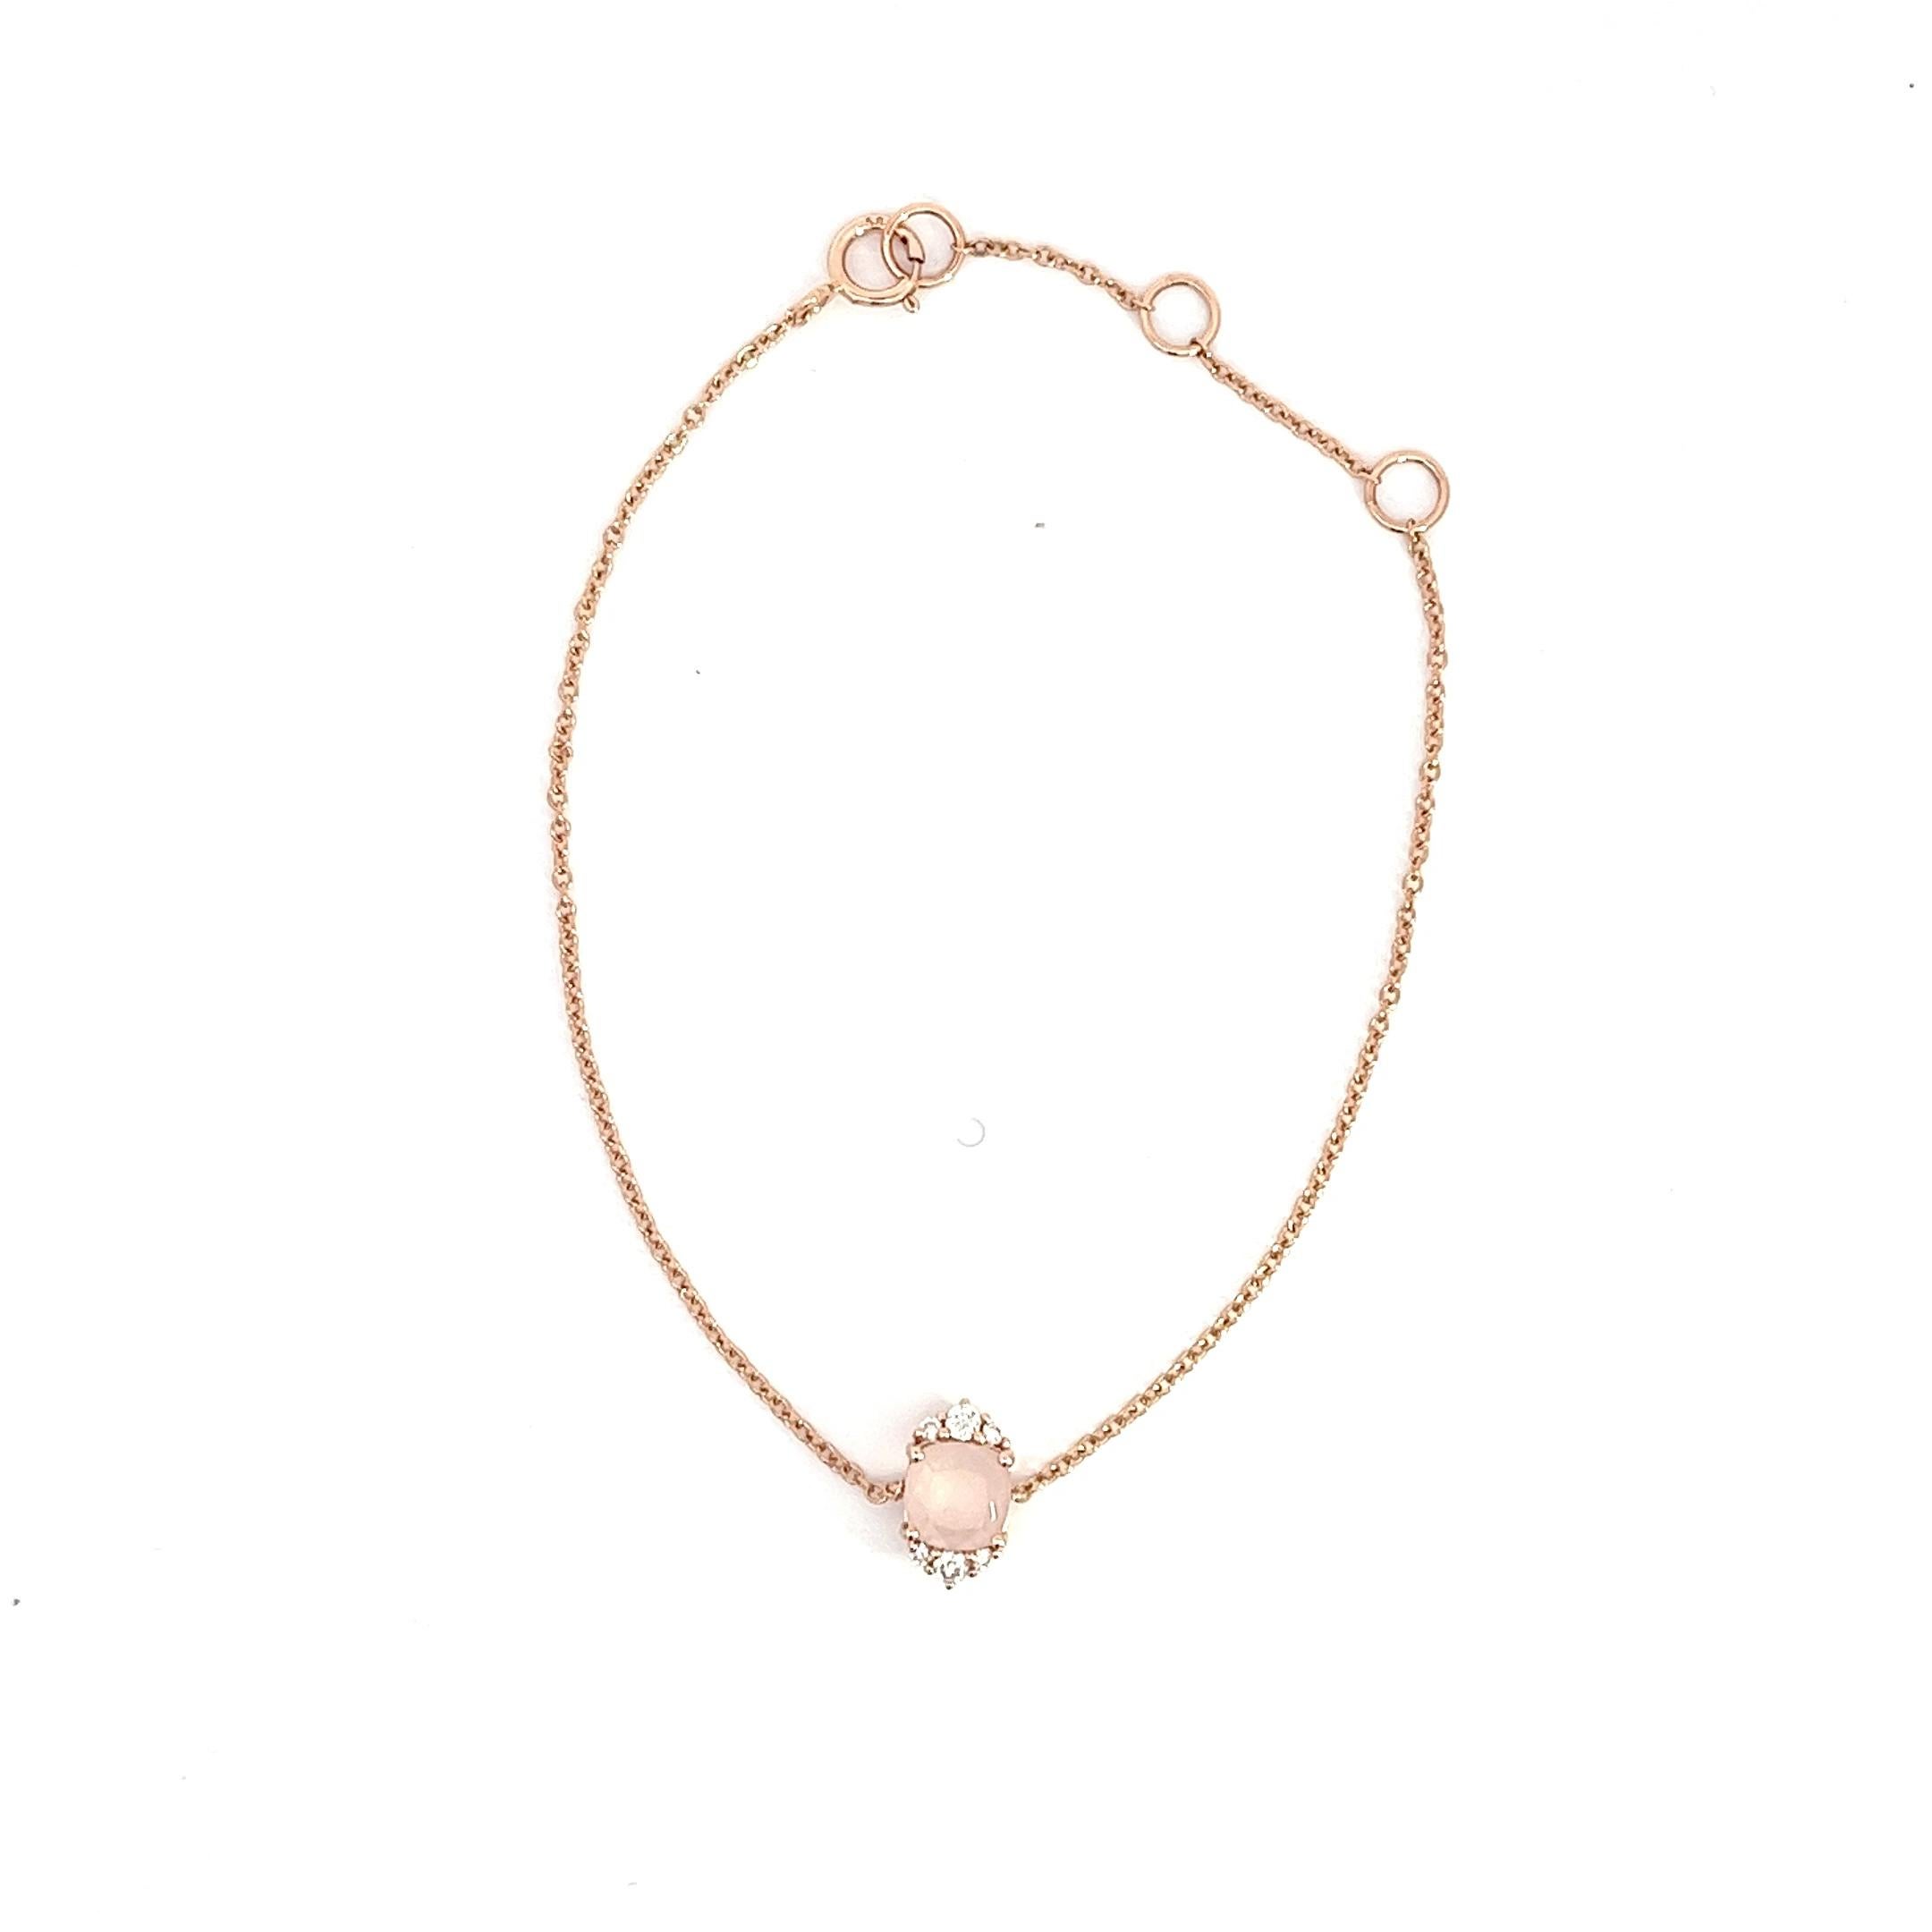 14K Rose Gold Bracelet

Diamonds 6 - 0.081cts

Pink Quartz 1 - 0.64cts

SKU 043048-001


With a heritage of ancient fine Swiss jewelry traditions, NATKINA is a Geneva based jewellery brand, which creates modern jewellery masterpieces suitable for